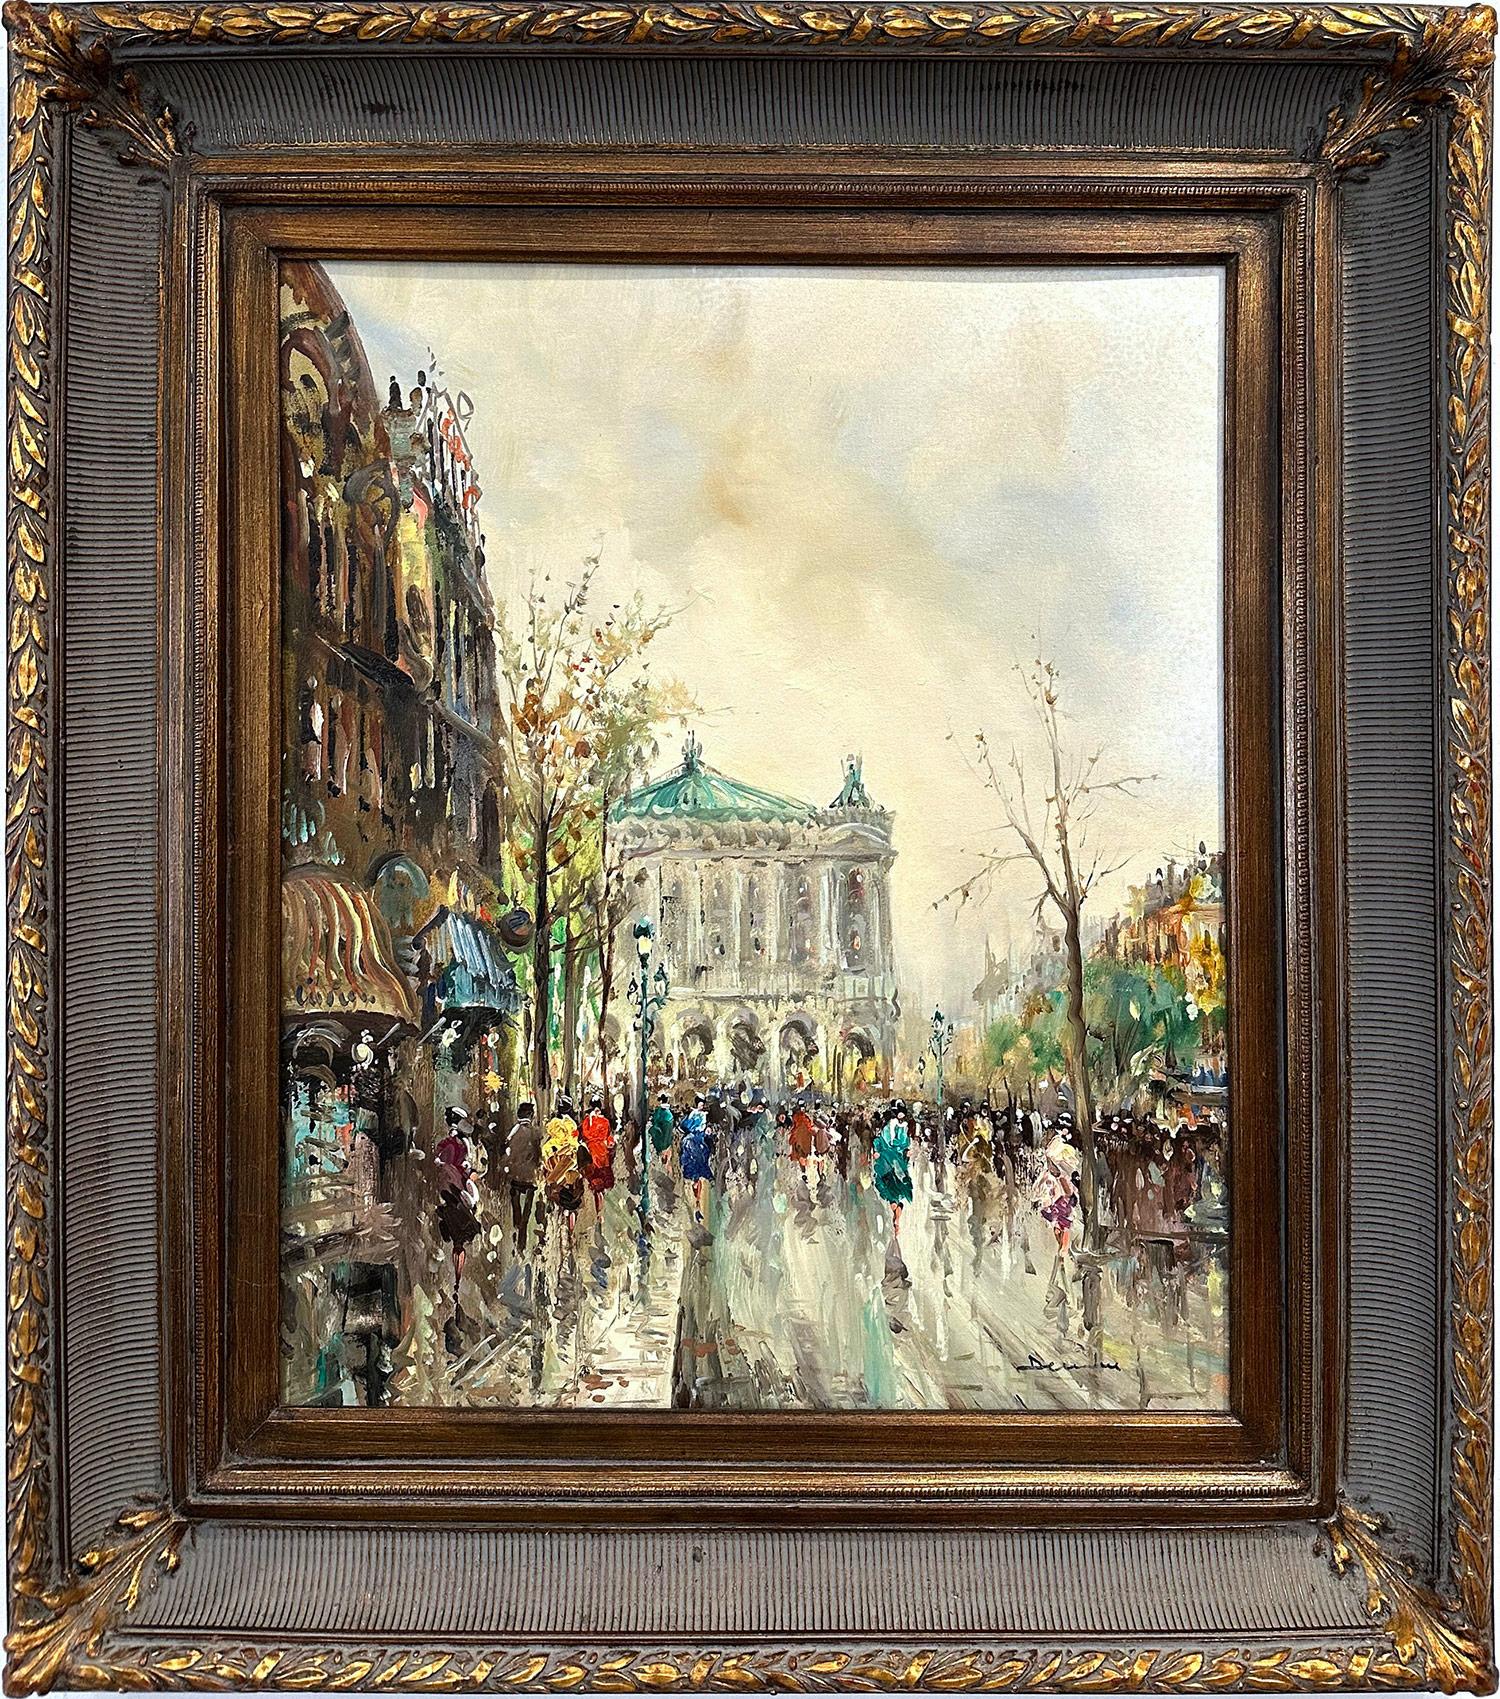 Pietro Demone Landscape Painting - "Day by the Palais Garnier" 20th Century Post-Impressionist Oil Painting Framed